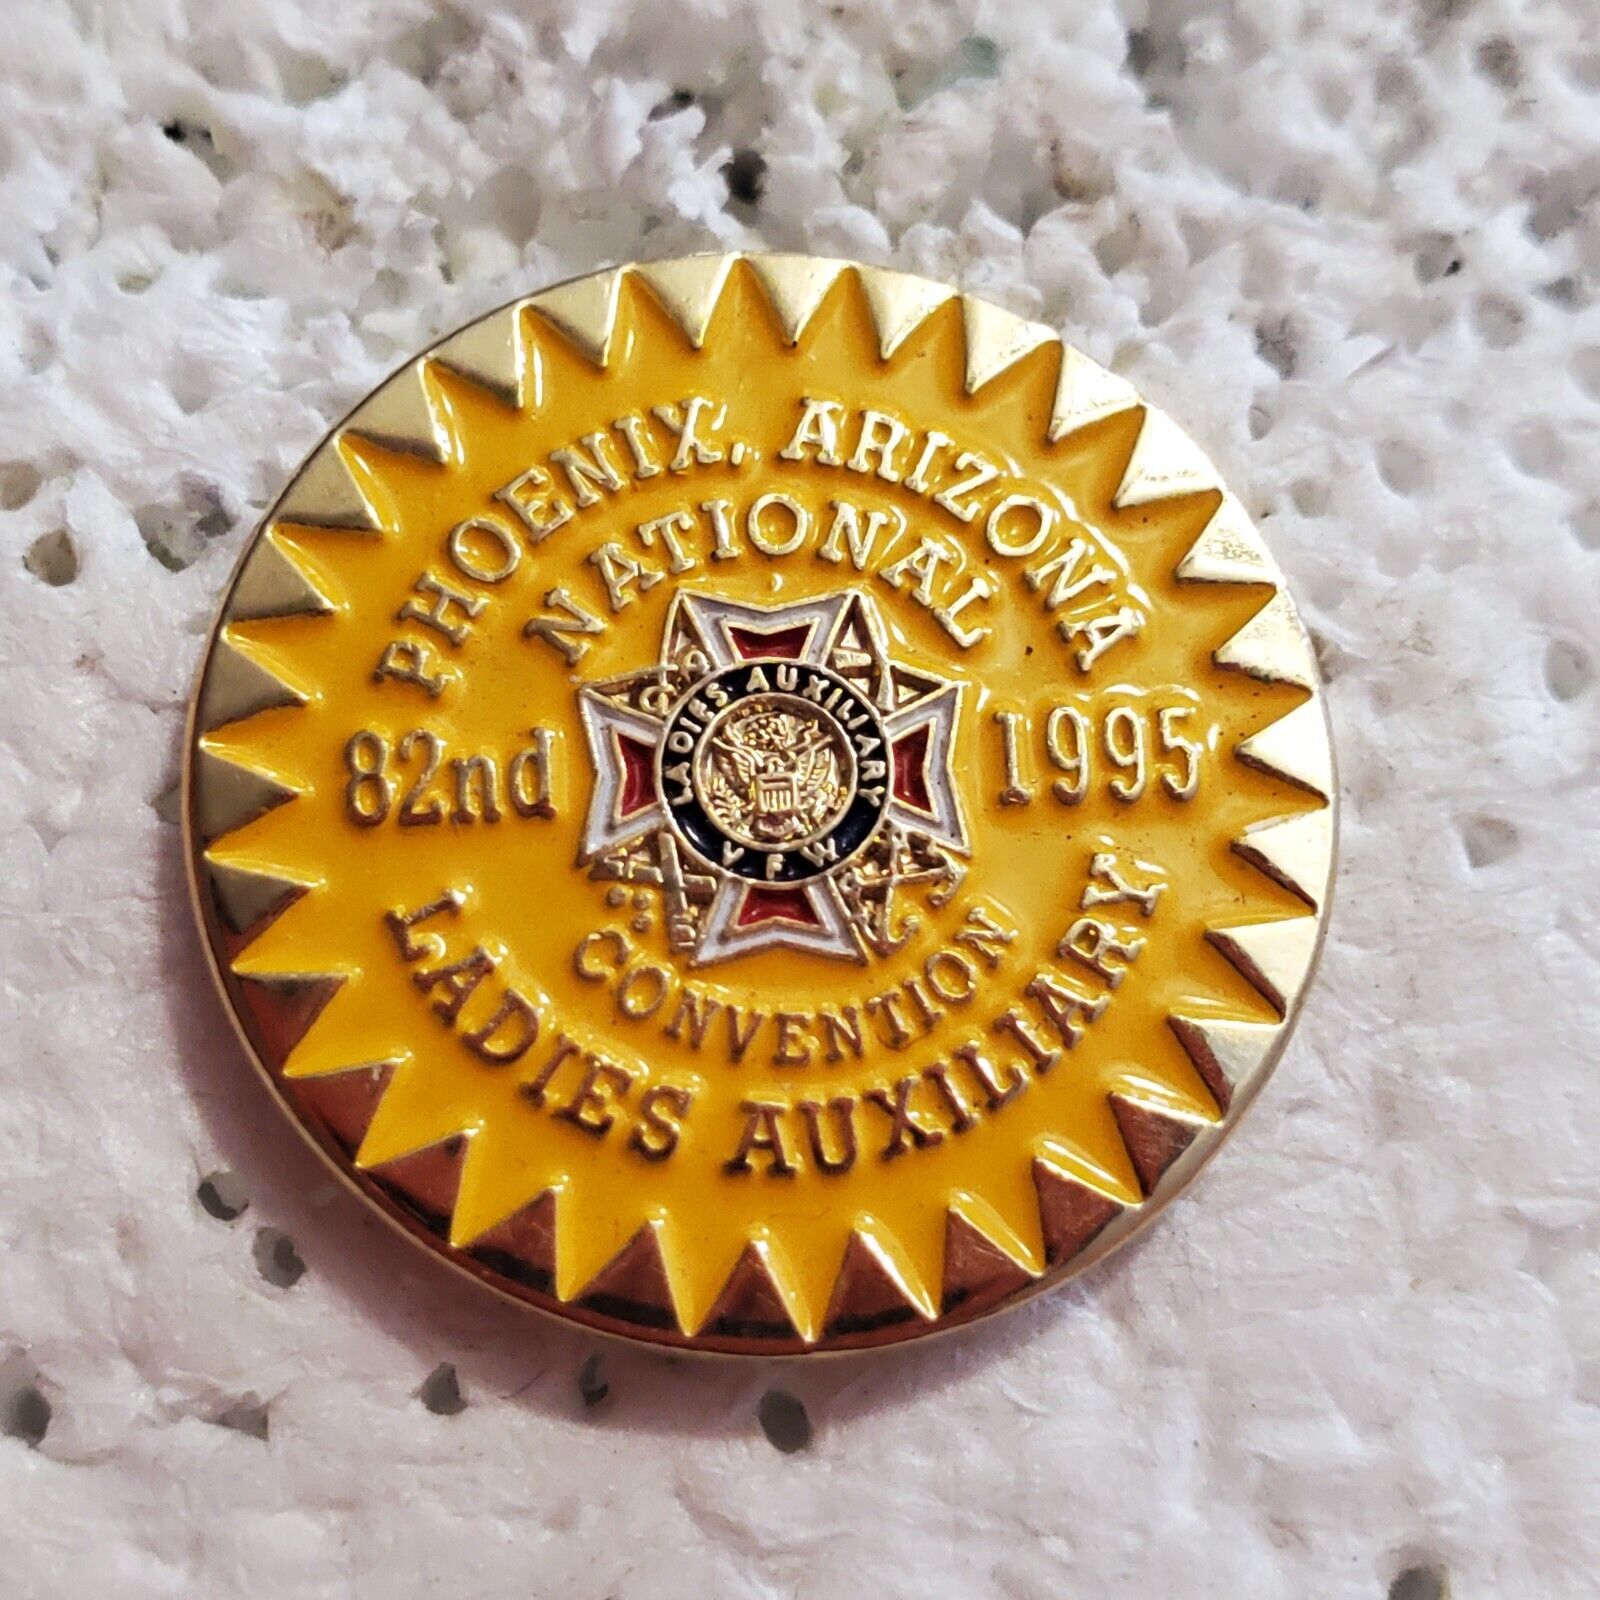 VFW 1995 Ladies Auxiliary Phoenix Arizona 82nd National Convention Lapel Hat Pin